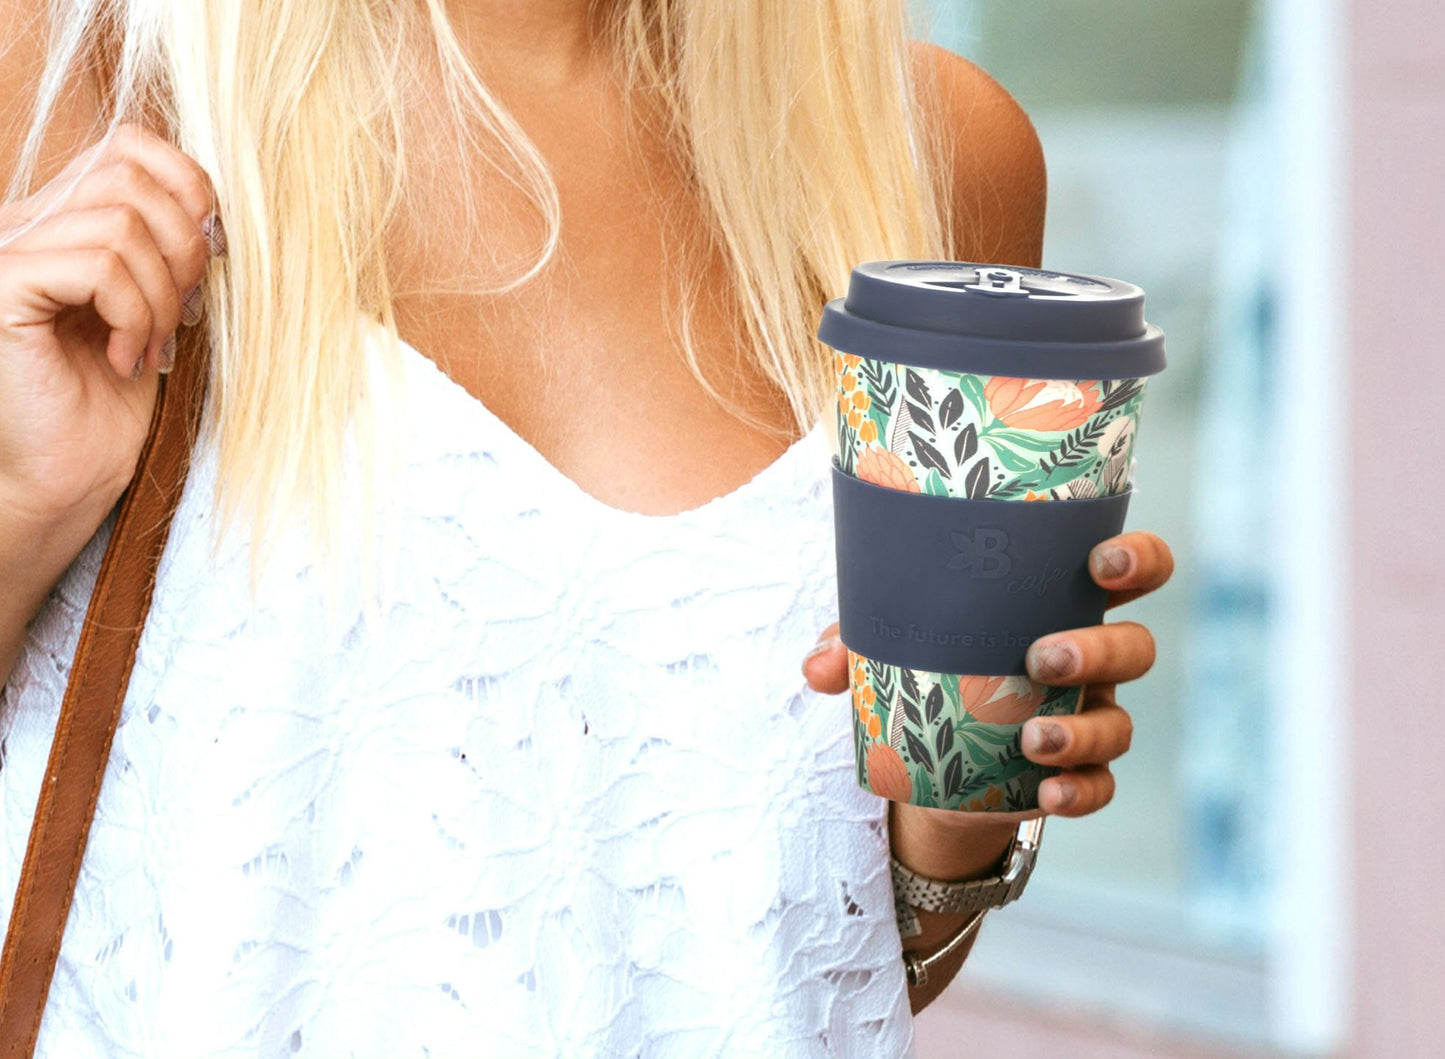 Reusable Bamboo Coffee Cup, Eco-friendly, Sustainable Takeaway Mug to Keep  